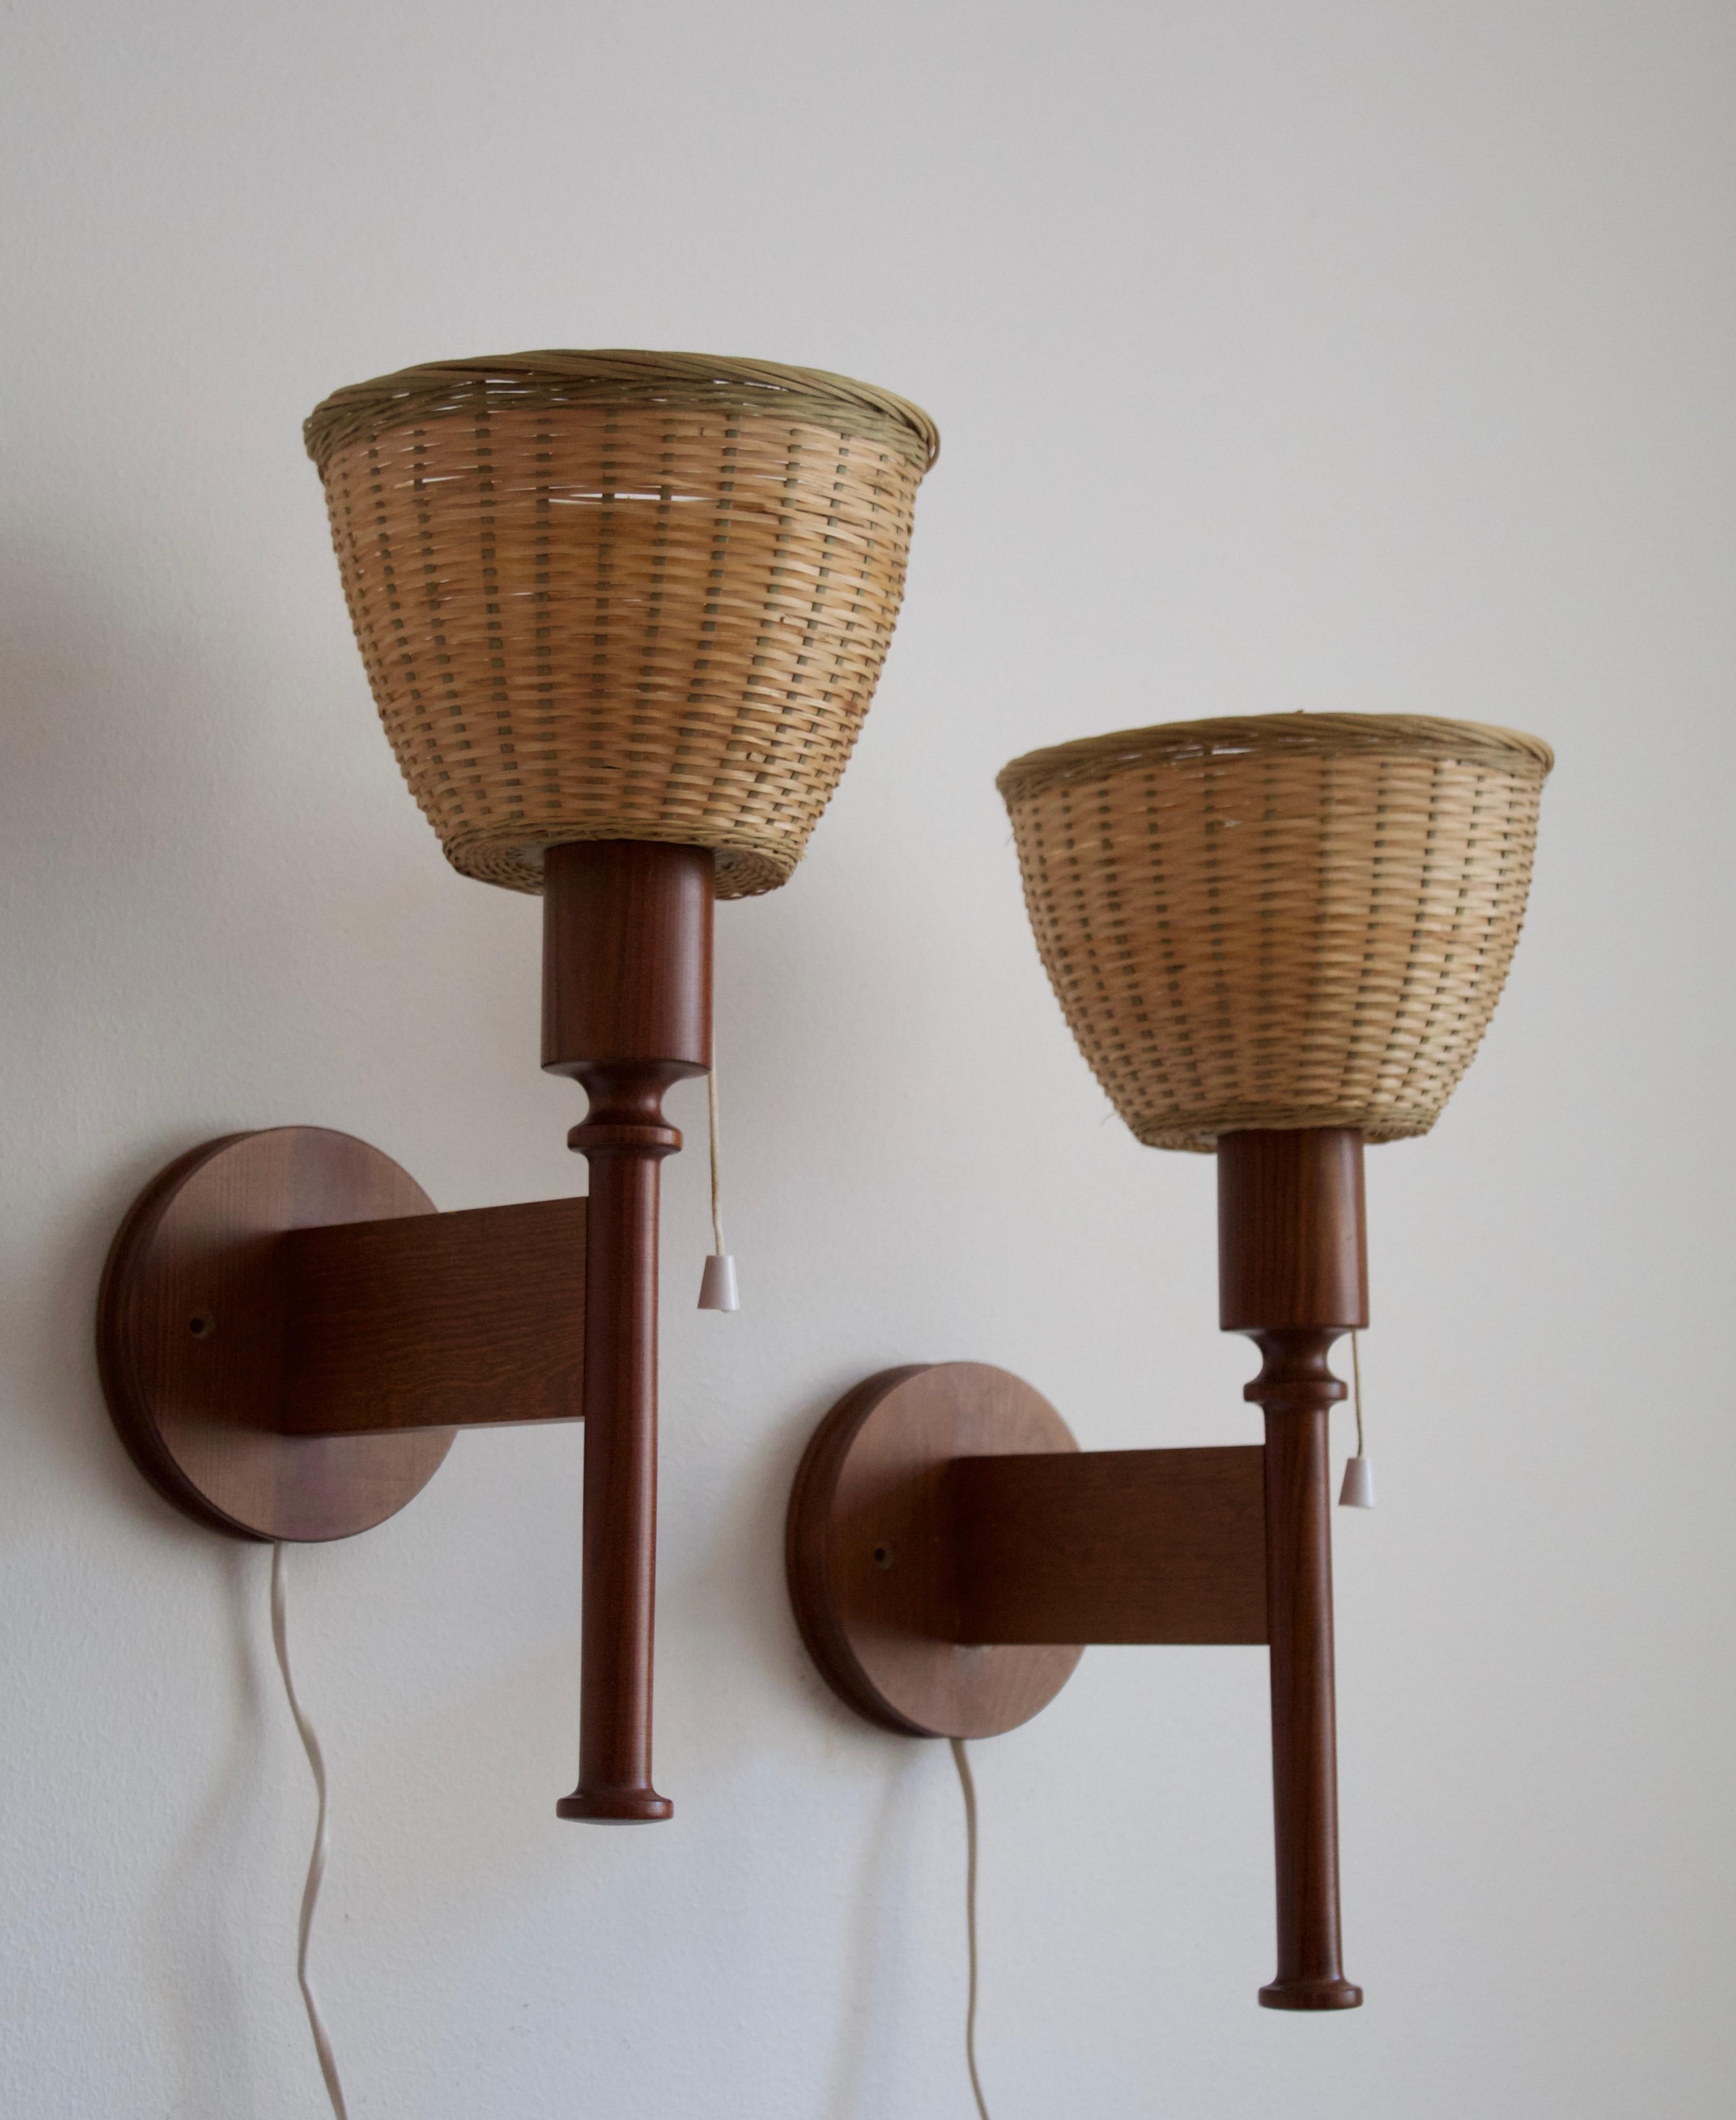 A set of sculptural solid dark-stained pine wall lights / sconces. Designed by Uno Kristiansson, for Luxus, Sweden, 1960s. Assorted vintage rattan lampshades.

Other designers of the period include Axel Einar Hjorth, Roland Wilhelmsson, Charlotte